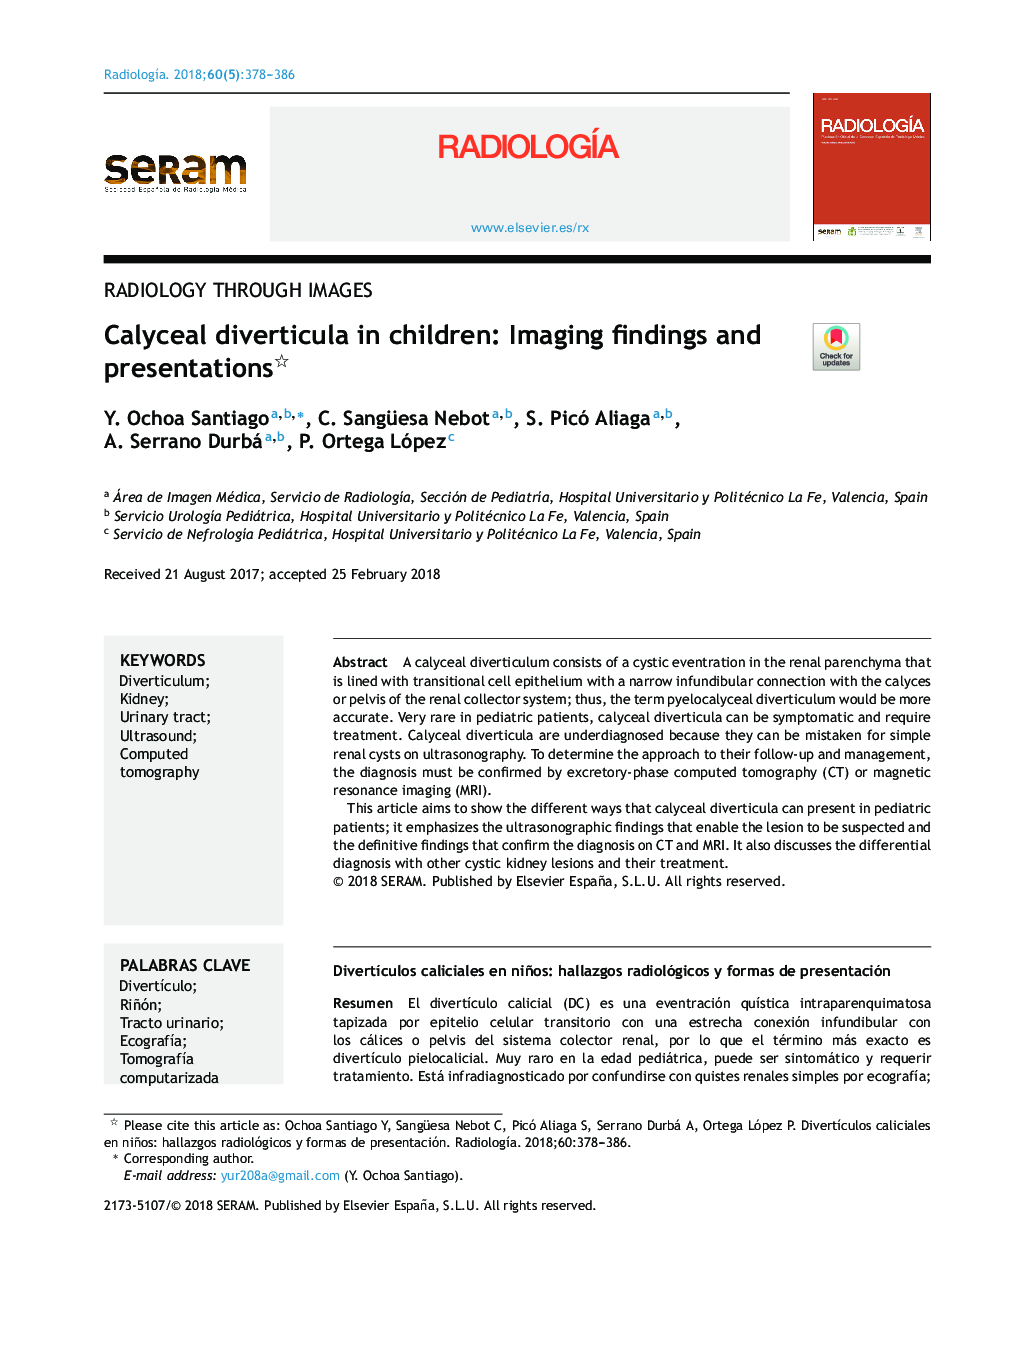 Calyceal diverticula in children: Imaging findings and presentations